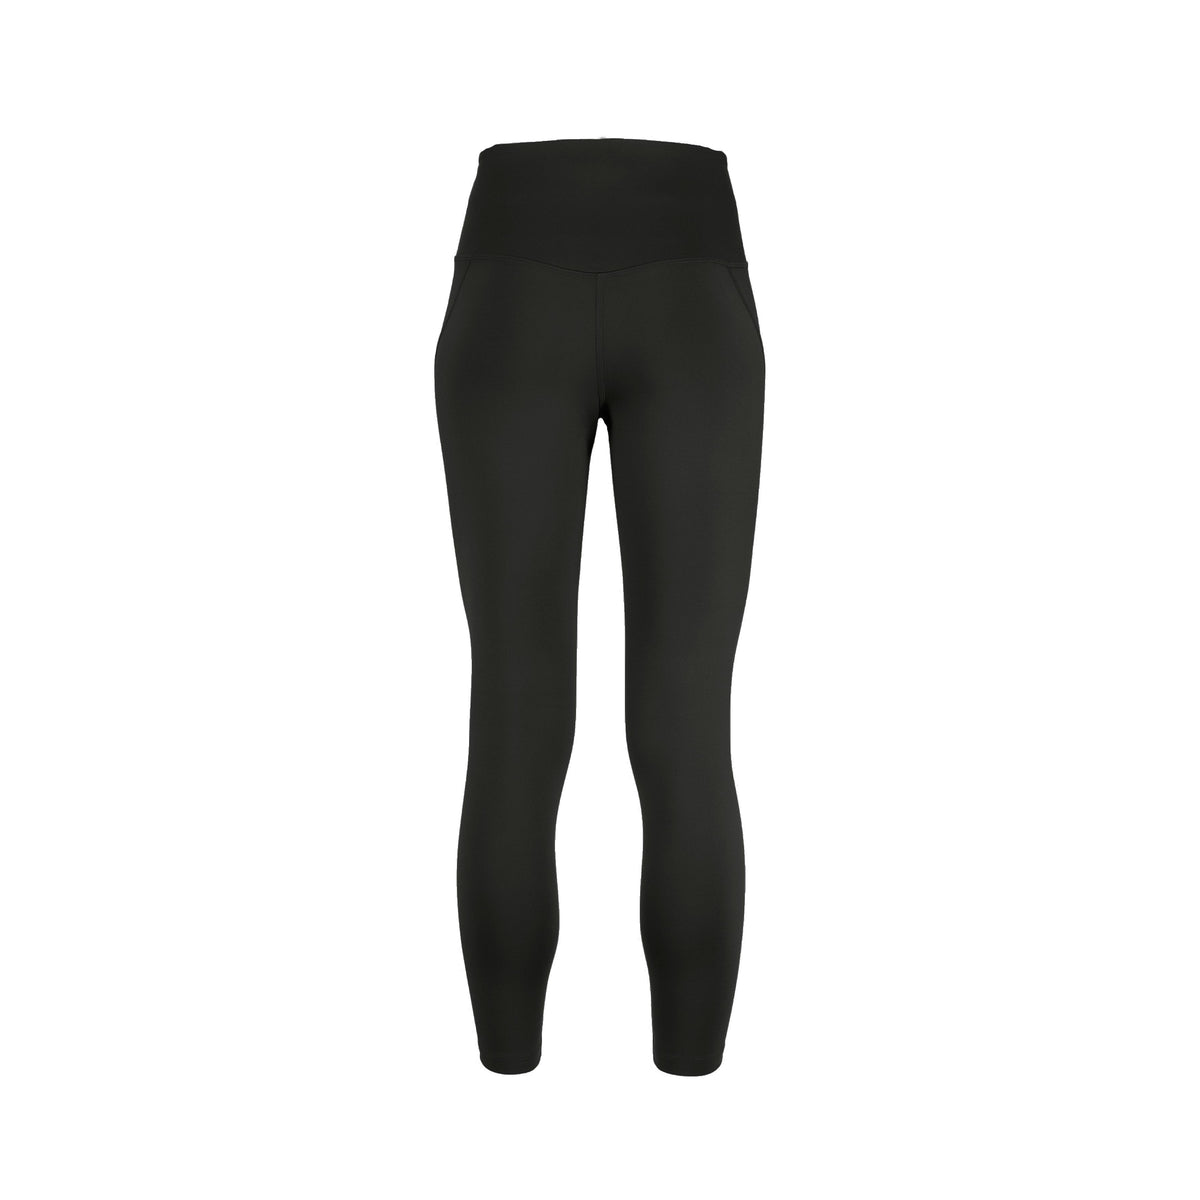 High-waisted compression leggings, 7/8